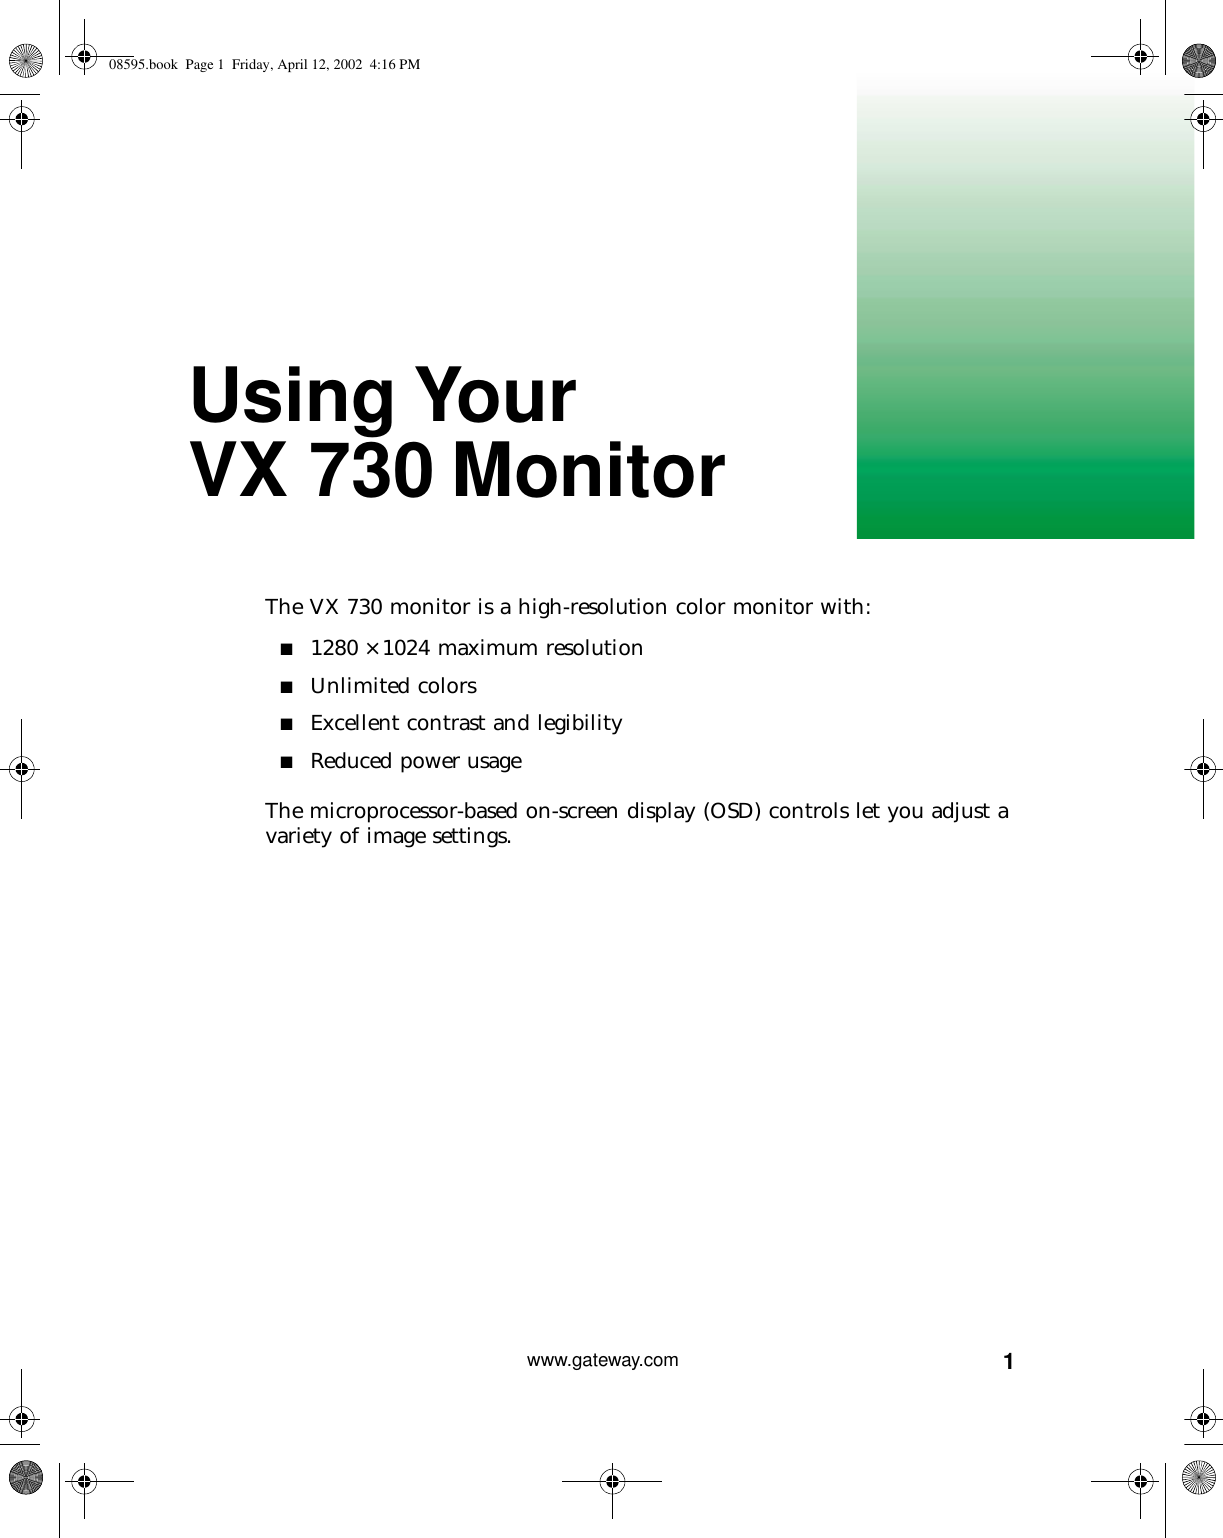 1www.gateway.comUsing Your VX 730 MonitorThe VX 730 monitor is a high-resolution color monitor with:■1280 × 1024 maximum resolution■Unlimited colors■Excellent contrast and legibility■Reduced power usageThe microprocessor-based on-screen display (OSD) controls let you adjust a variety of image settings.08595.book  Page 1  Friday, April 12, 2002  4:16 PM